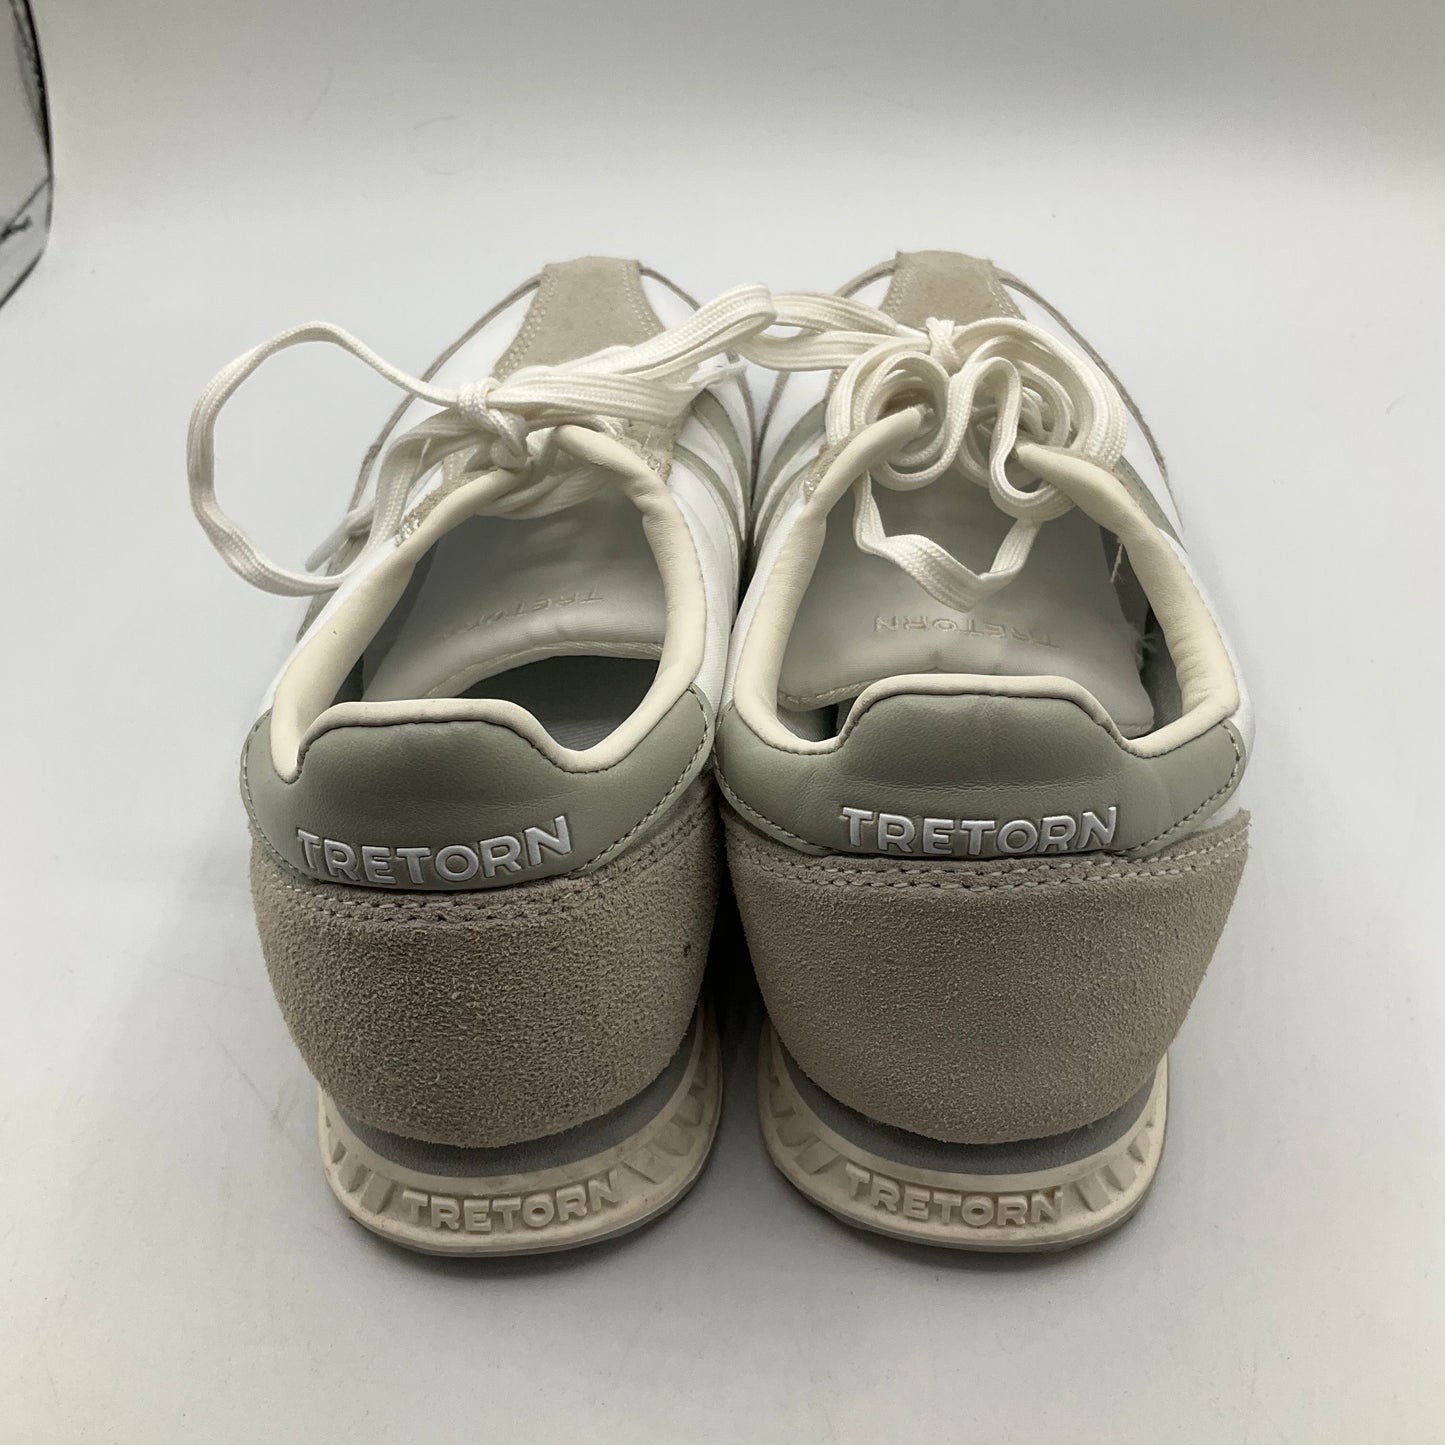 White Shoes Sneakers Cmb, Size 6.5